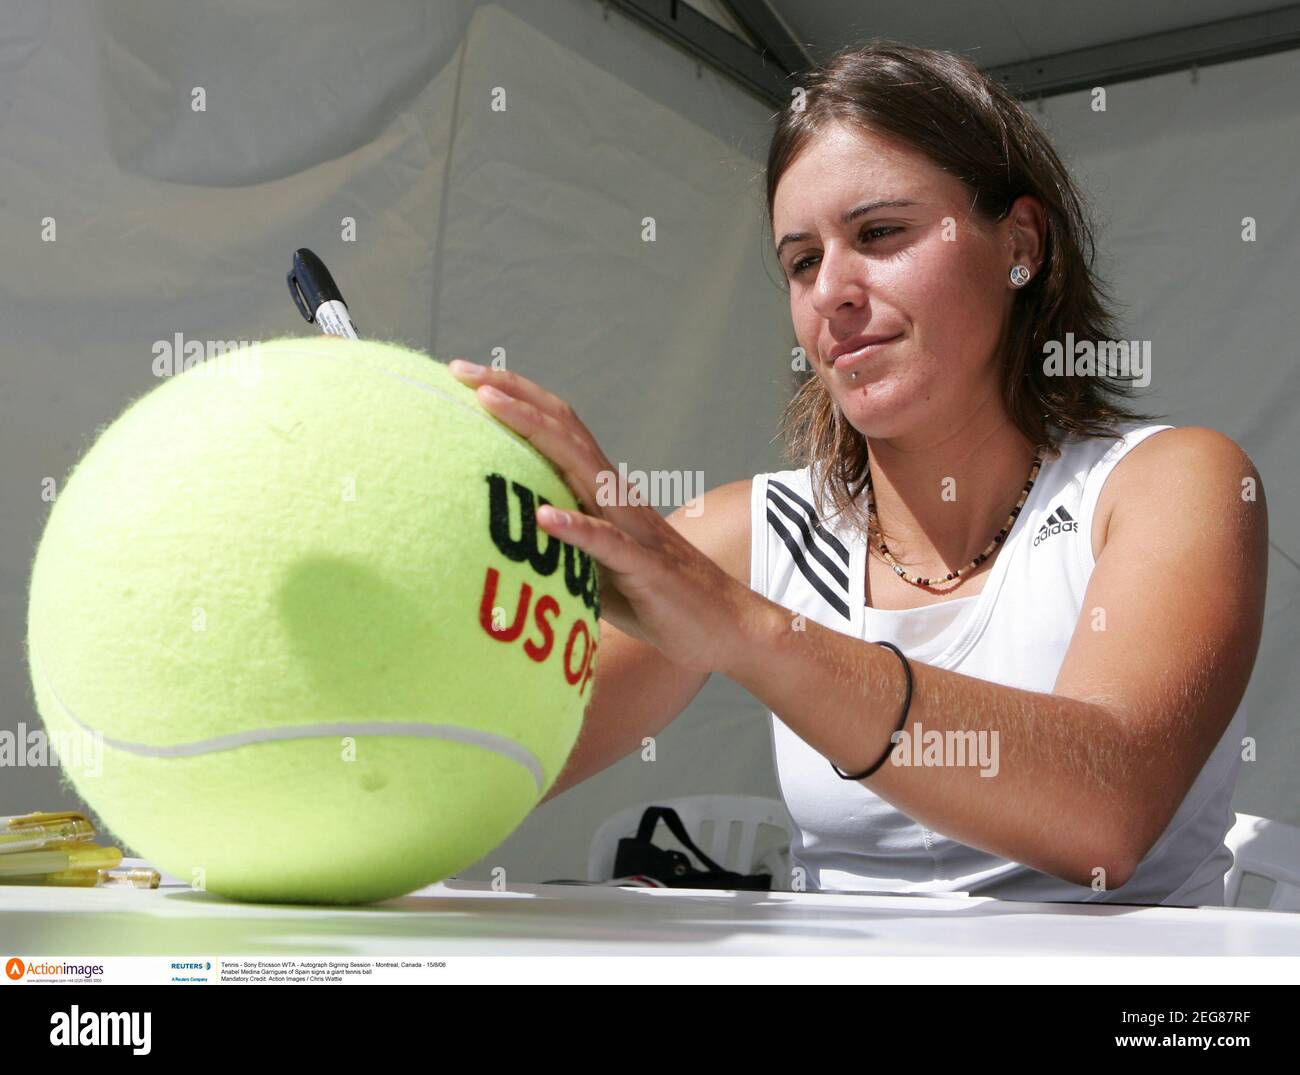 Tennis - Sony Ericsson WTA - Autograph Signing Session - Montreal, Canada - 15/8/06  Anabel Medina Garrigues of Spain signs a giant tennis ball   Mandatory Credit: Action Images / Chris Wattie Stock Photo